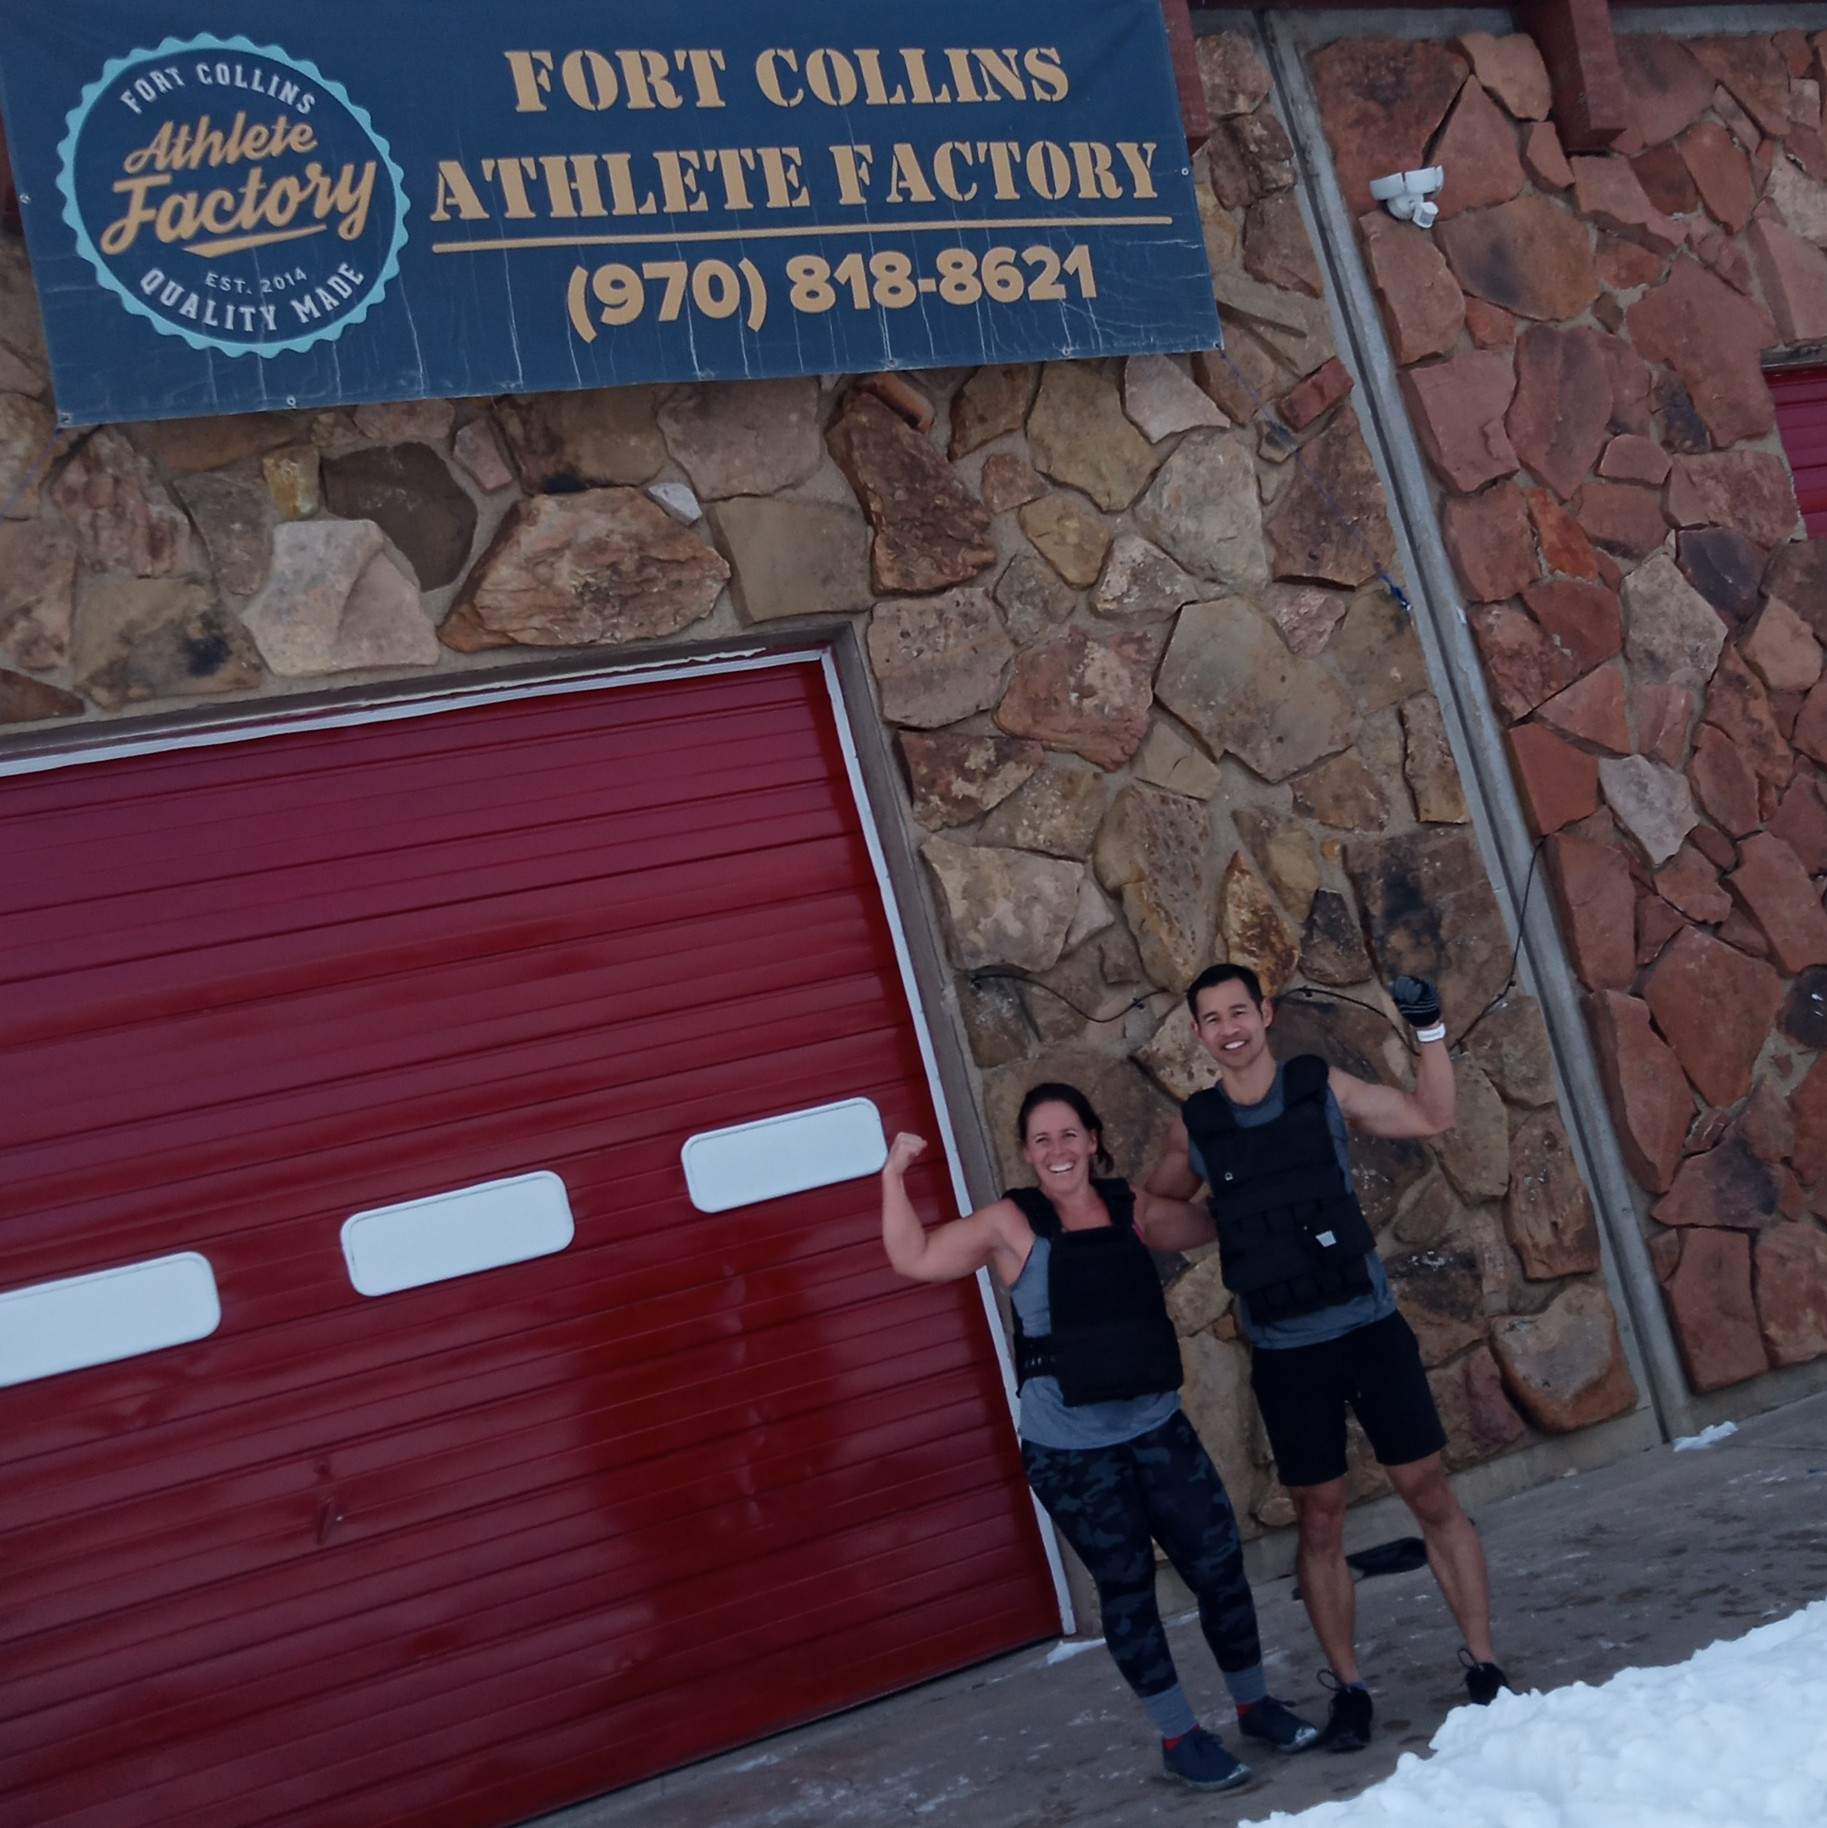 Jennifer and me at the Fort Collins Athlete Factory after completing the Thanksgiving Murph.